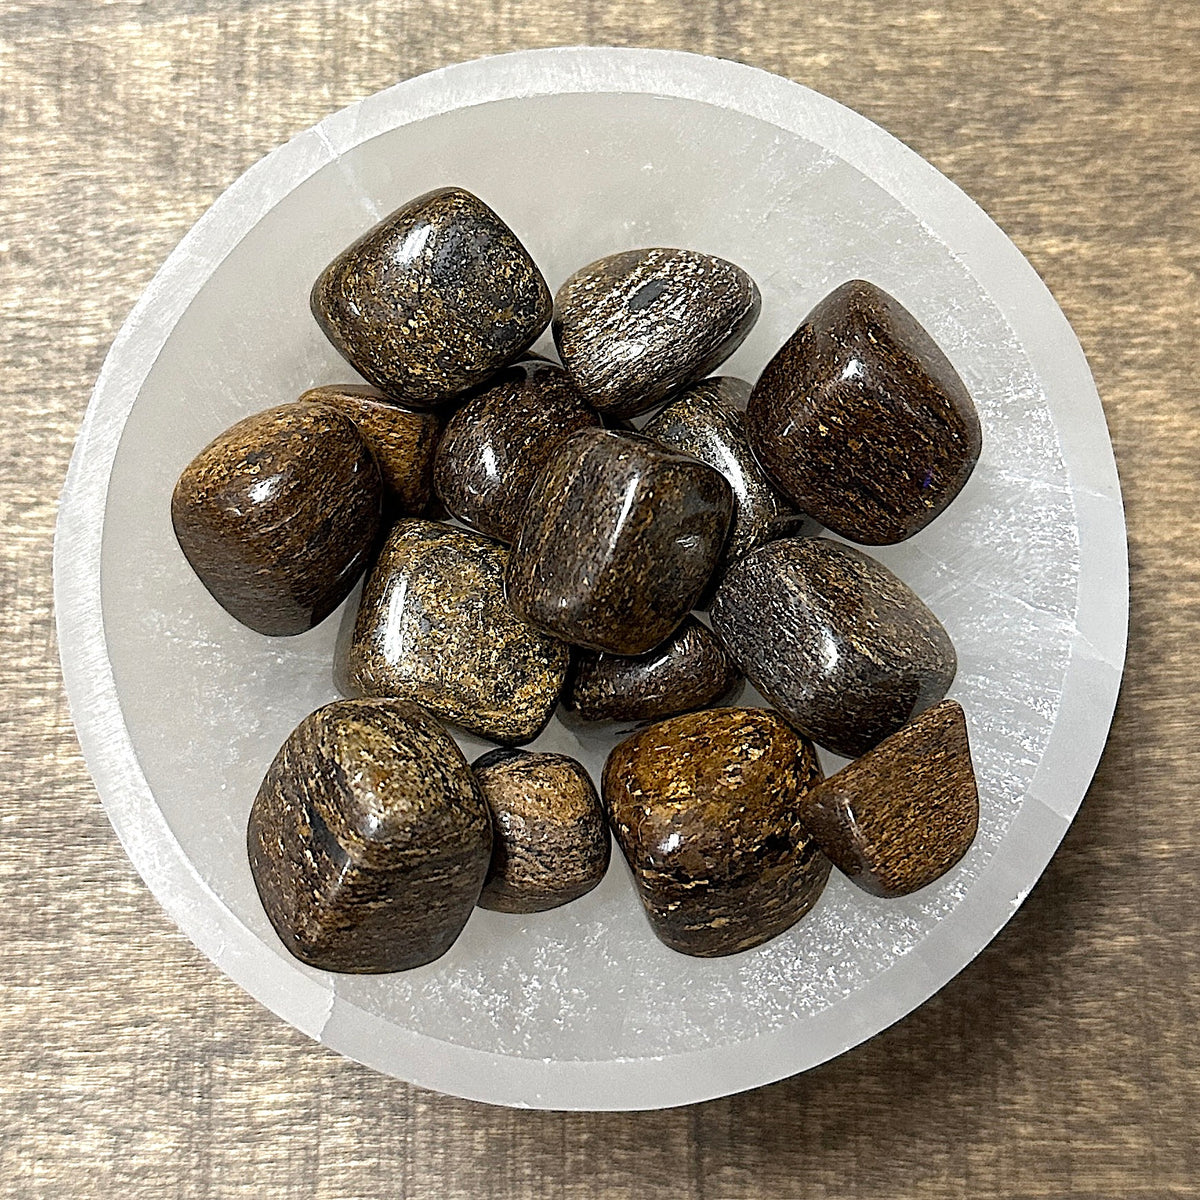 Shot of various bronzite tumbled stones in a small bowl